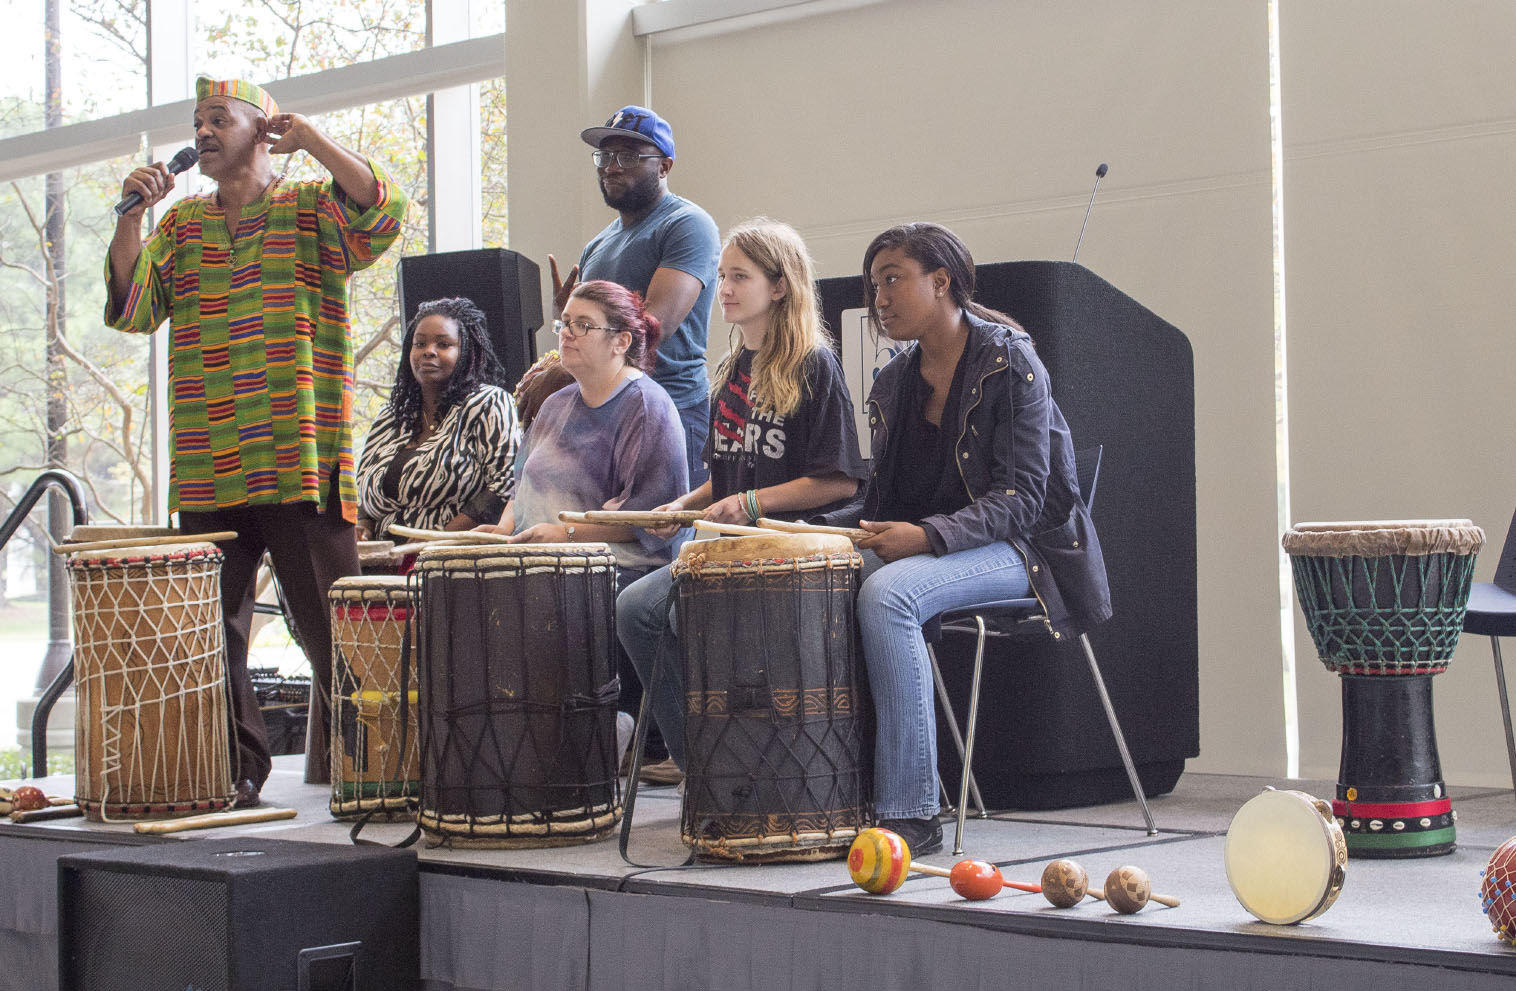 The International Festival allows South Campus students to experience different musical instruments from across the world Nov. 17.